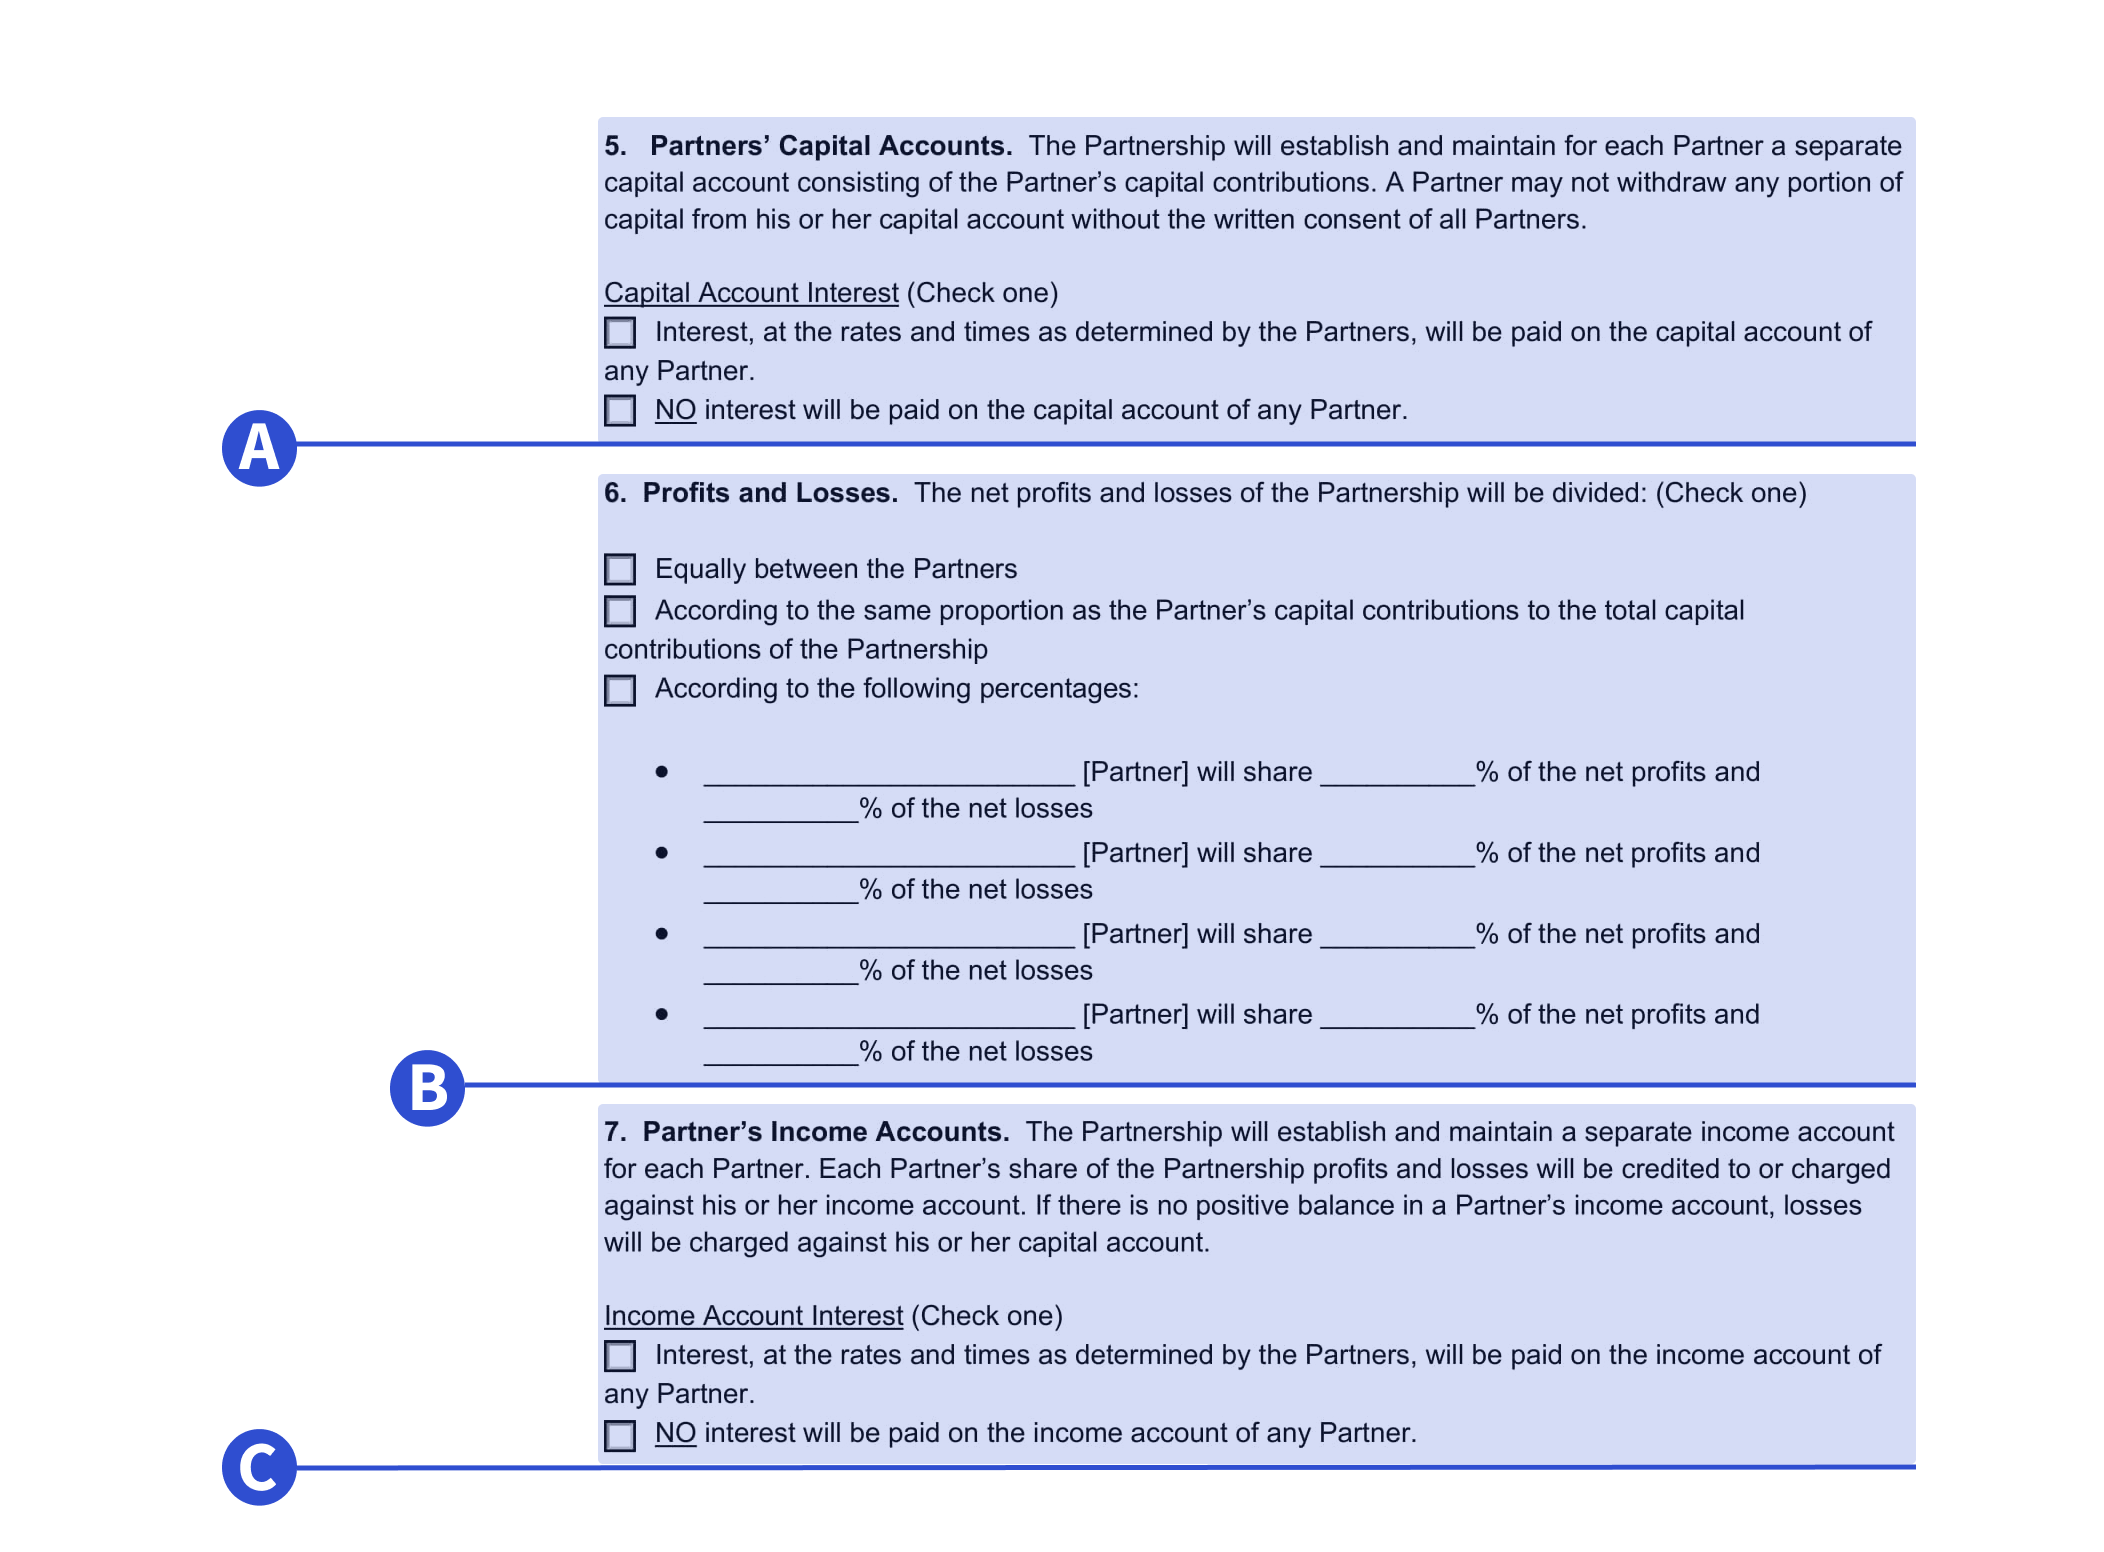 An example of where to detail capital account, profits, losses and income account information in our 50-50 partnership agreement template.